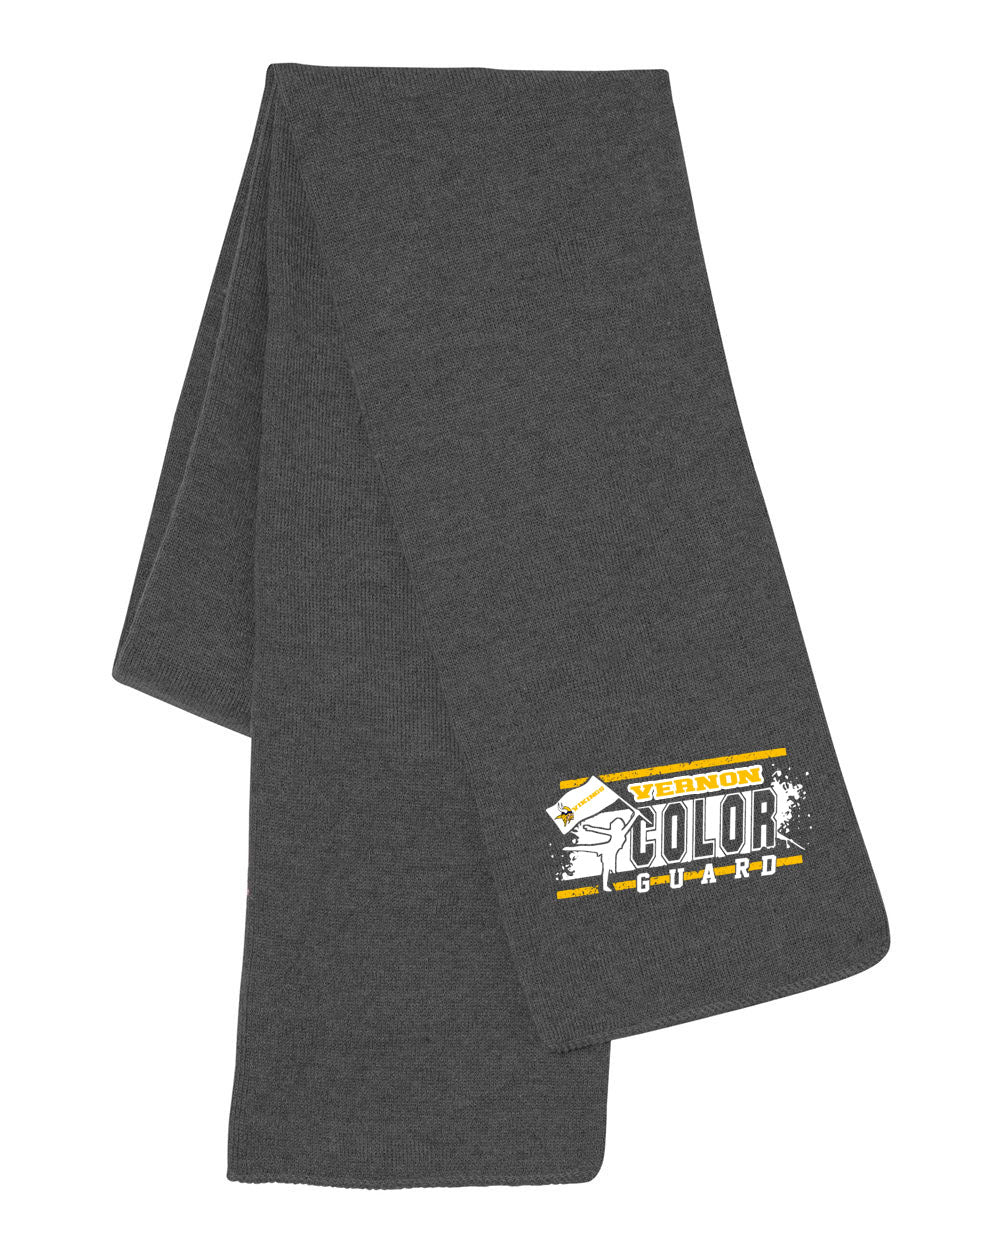 Vernon Marching Band design 4 Scarf